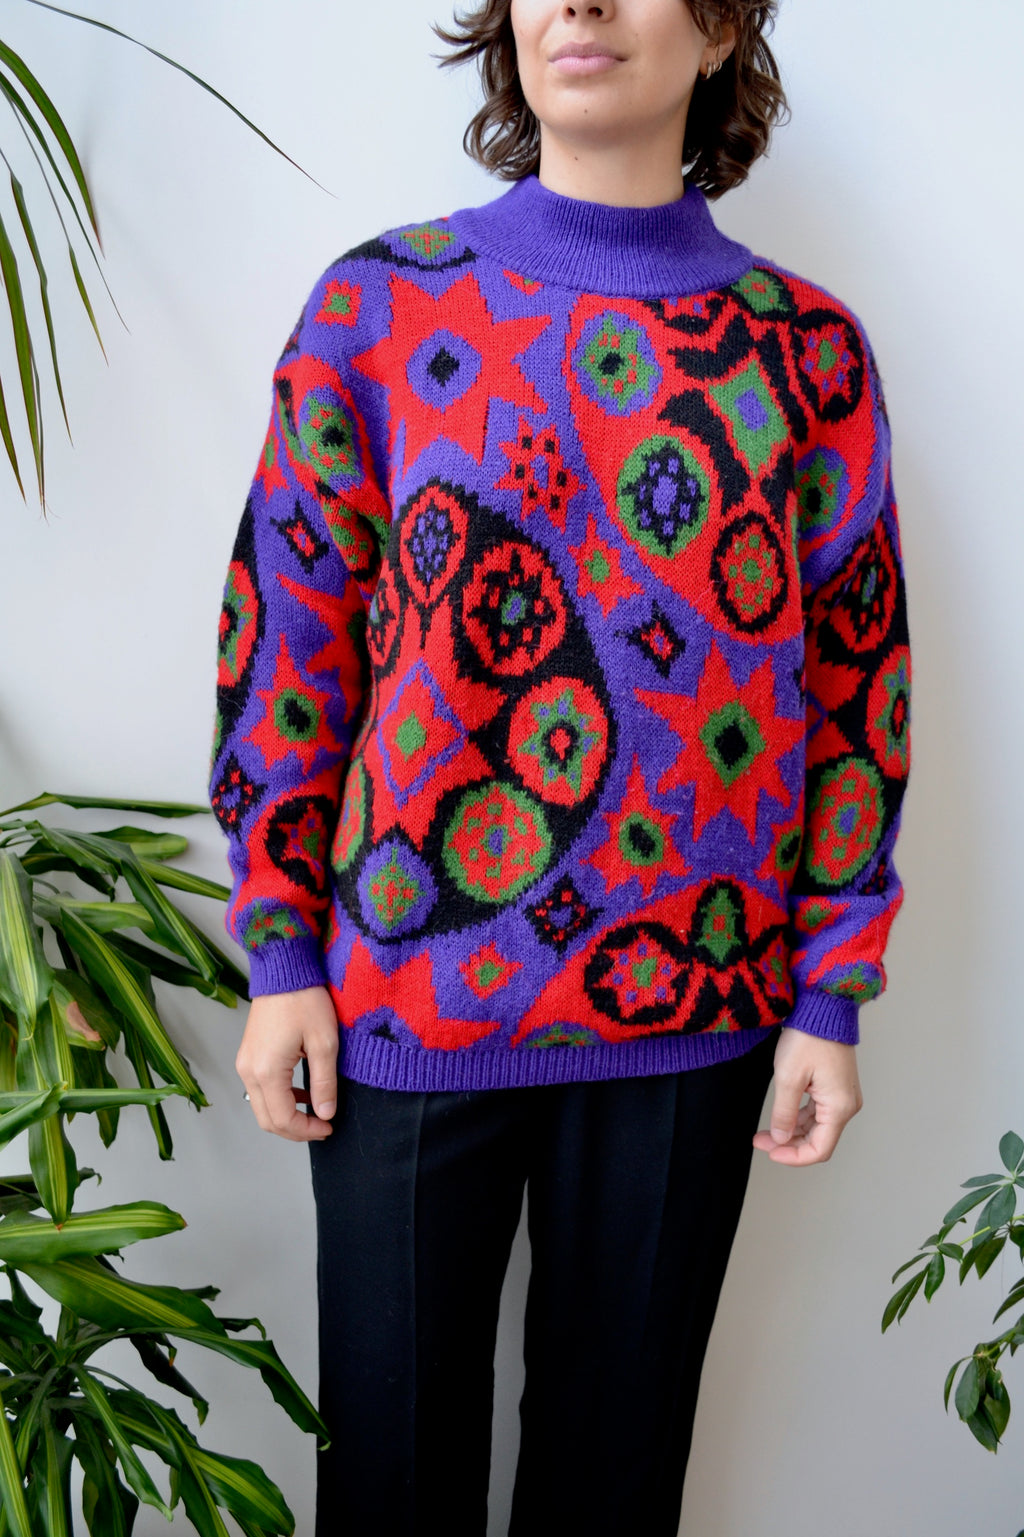 90s Over-The-Top Benetton Sweater